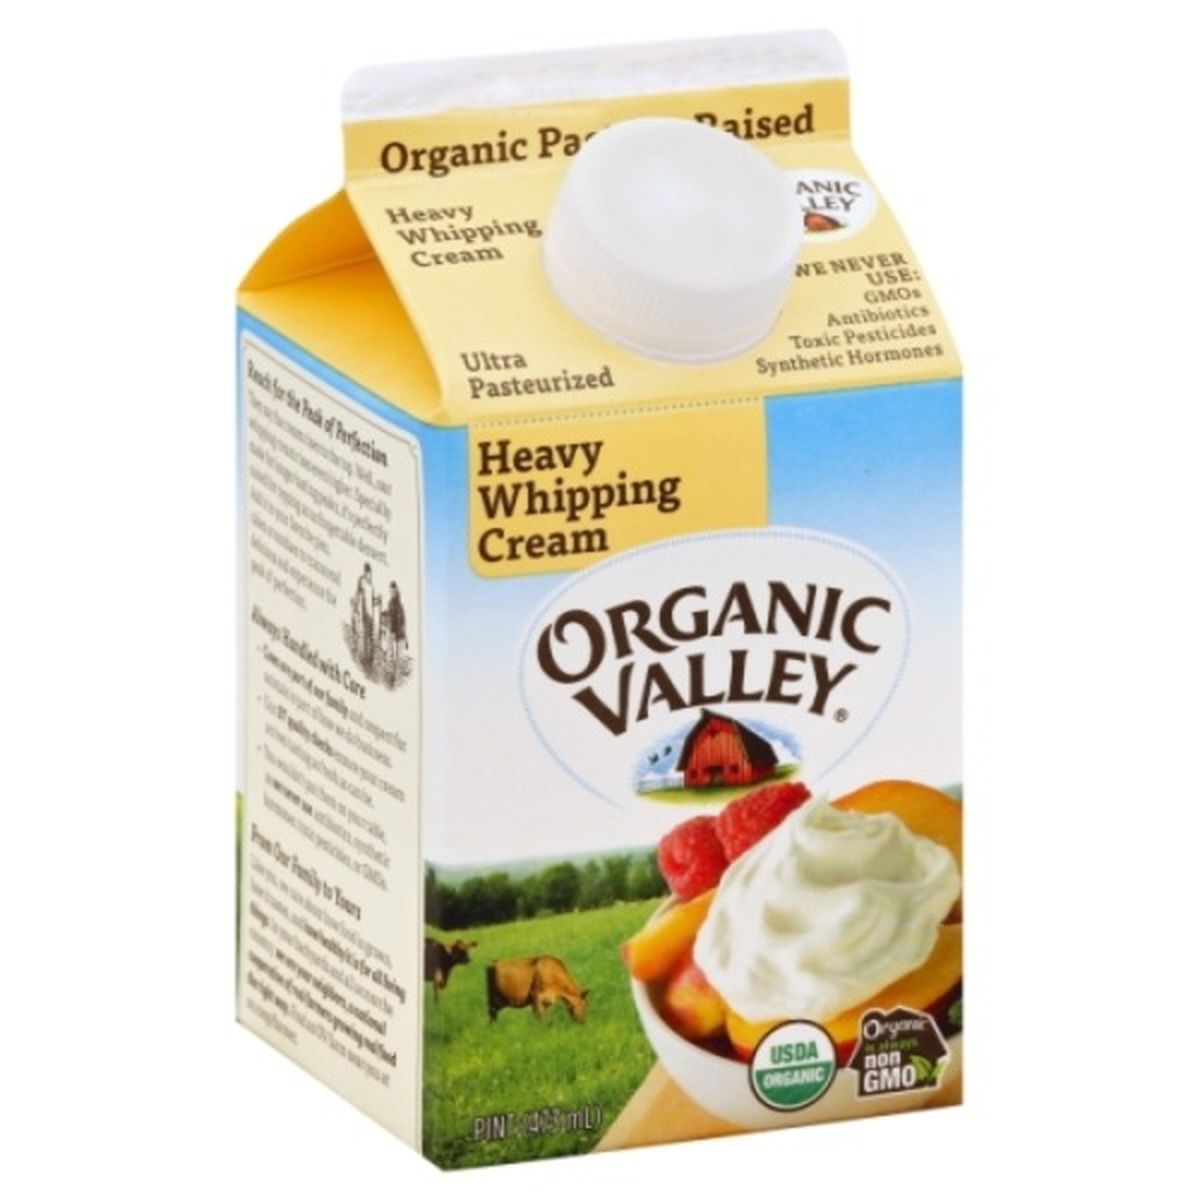 Calories in Organic Valley Whipping Cream, Heavy